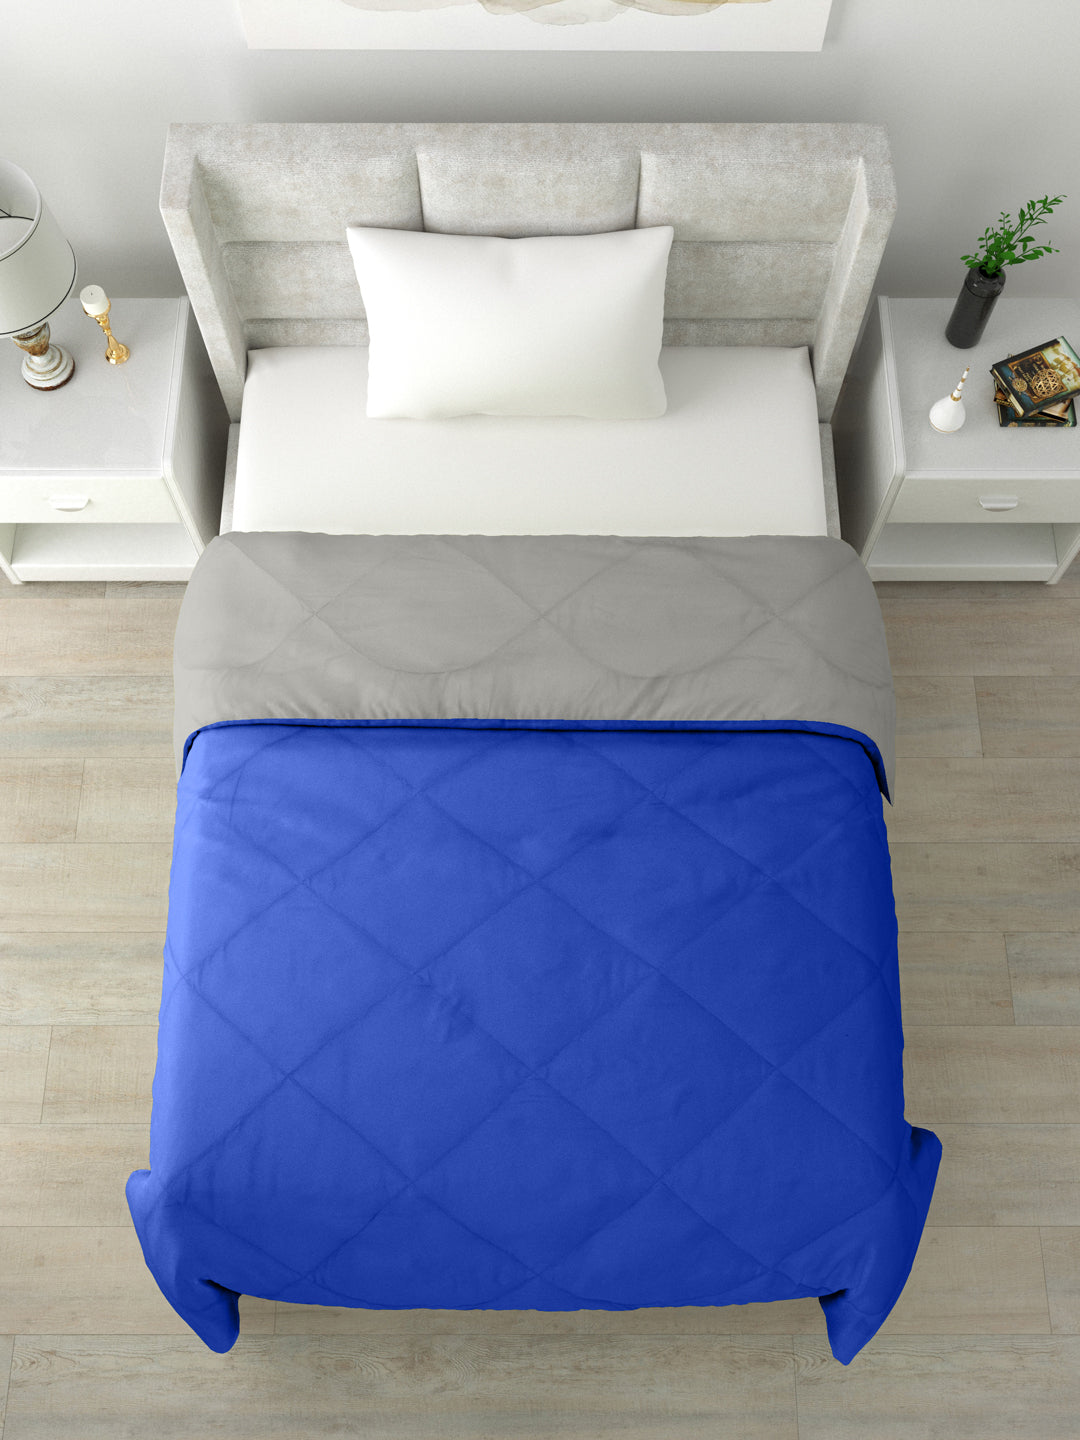 Reversible Single Bed Comforter 200 GSM 60x90 Inches (Grey & Blue)